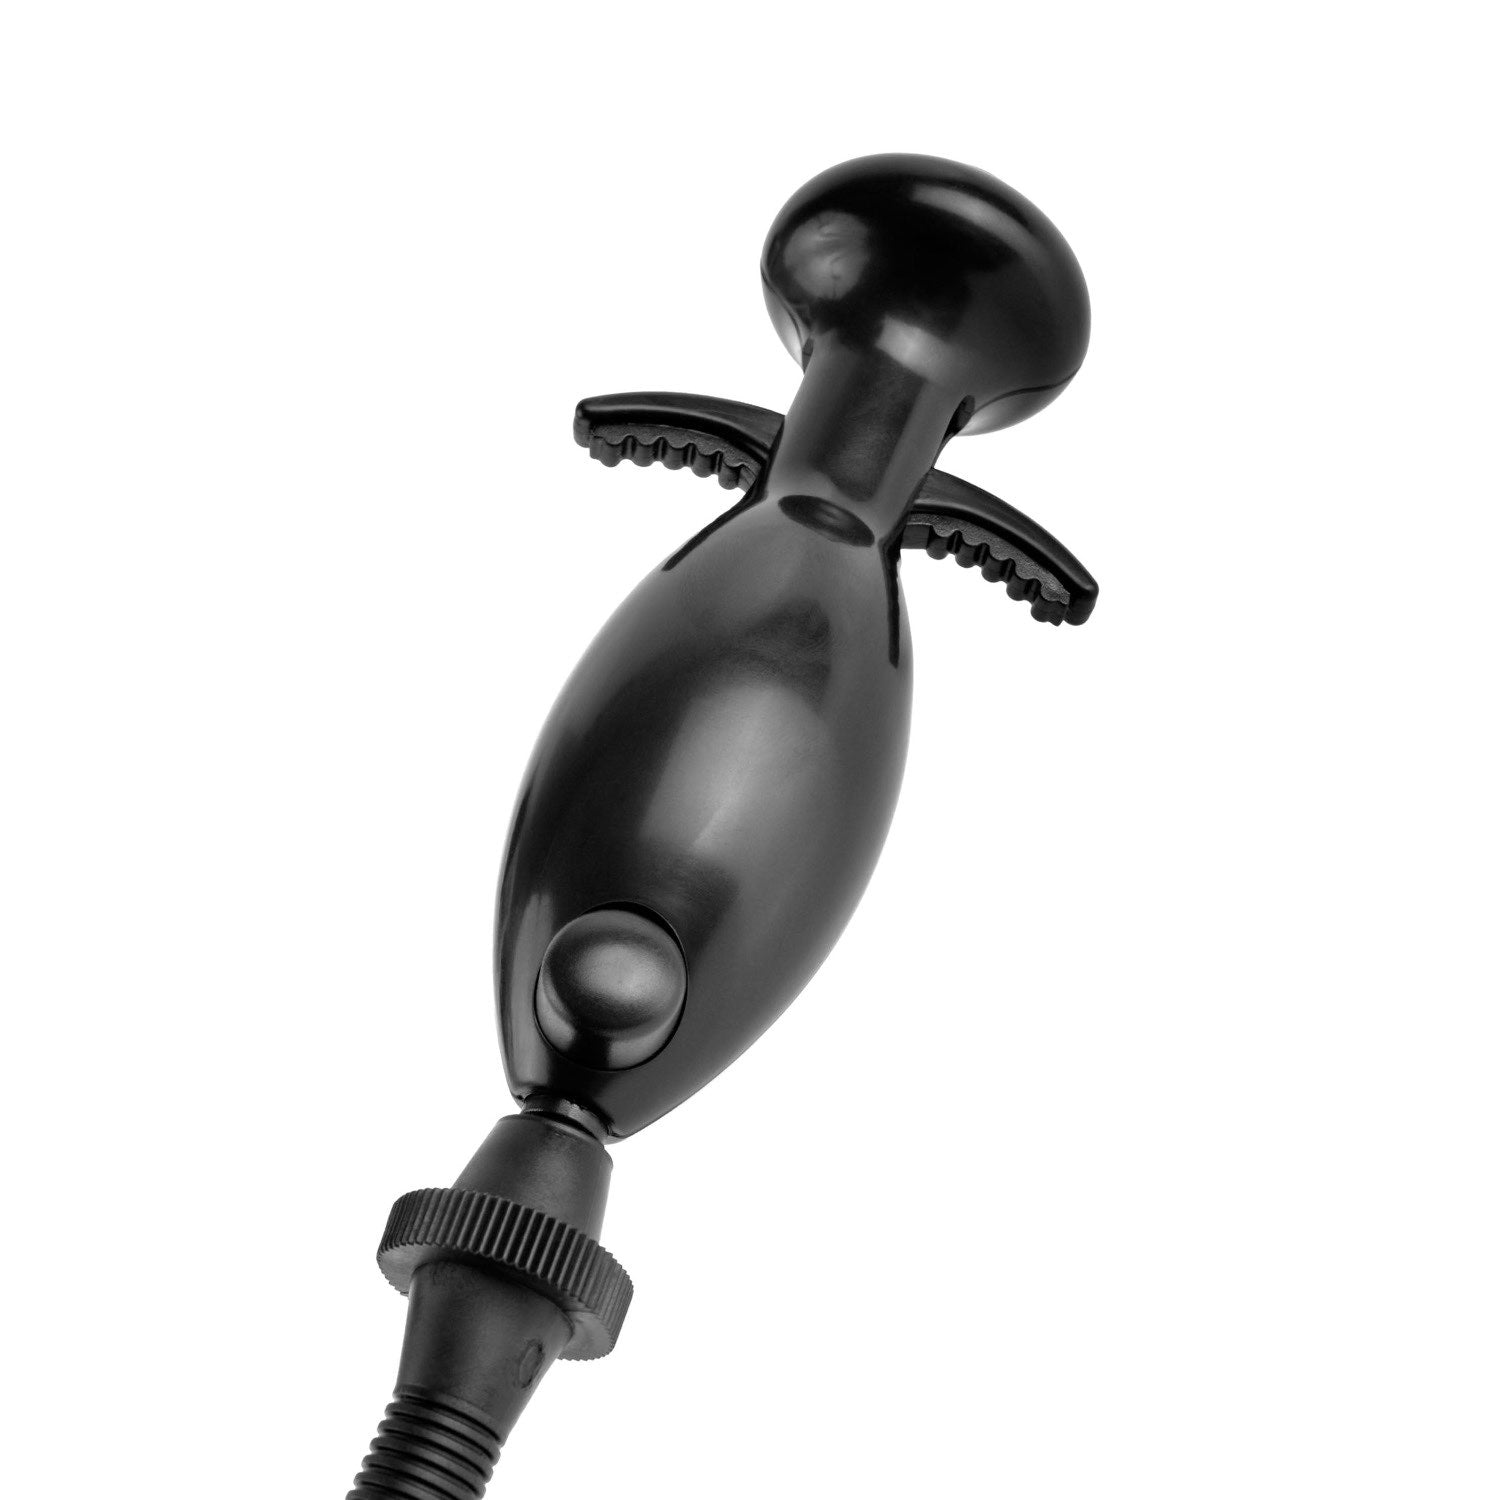 Fetish Fantasy Extreme Vibrating Pussy Pump - Black Vibrating Pussy Pump by Pipedream